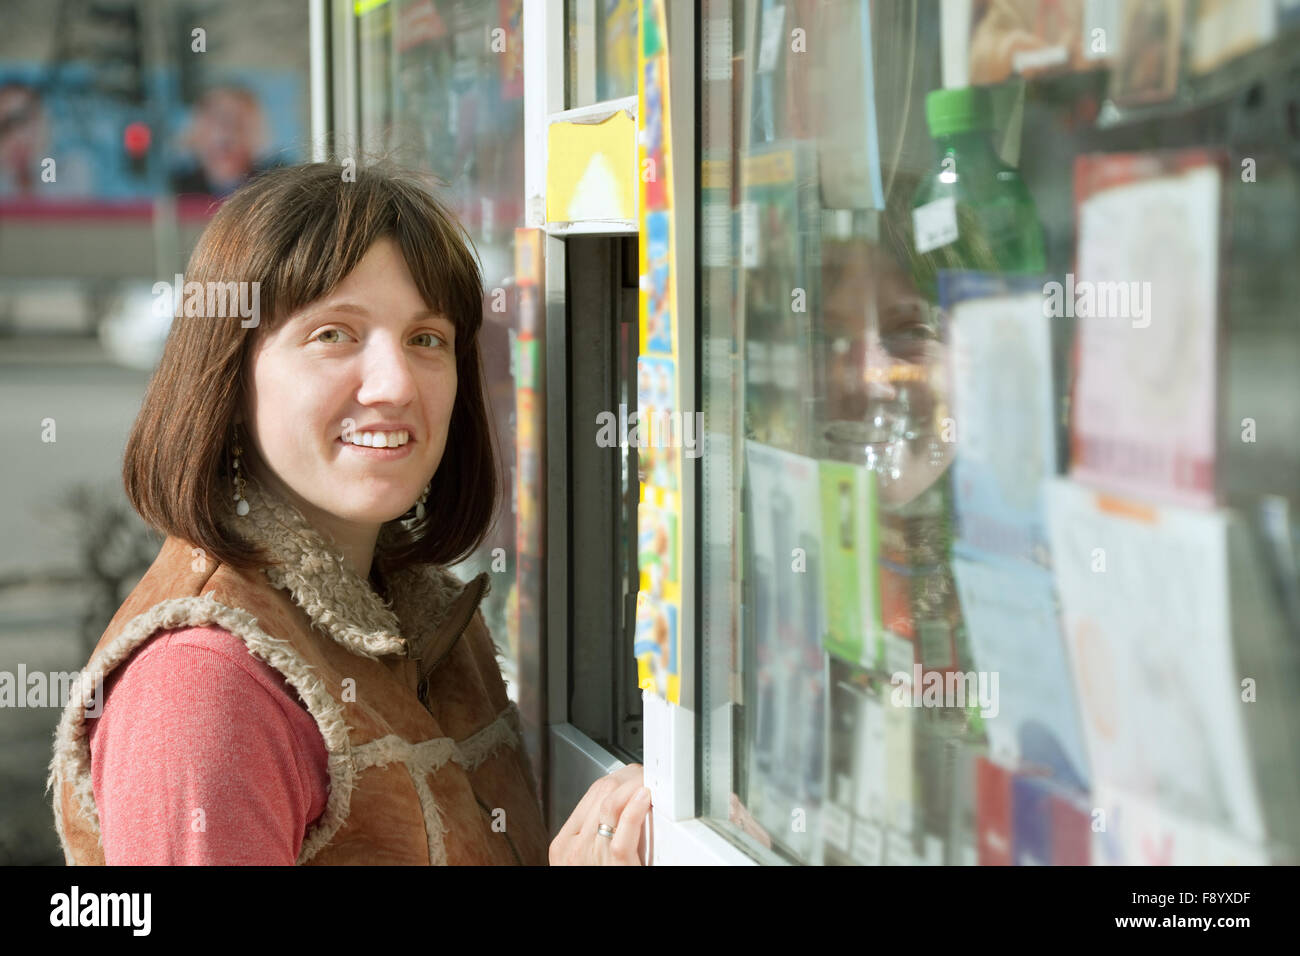 woman buys something at the newsstand Stock Photo